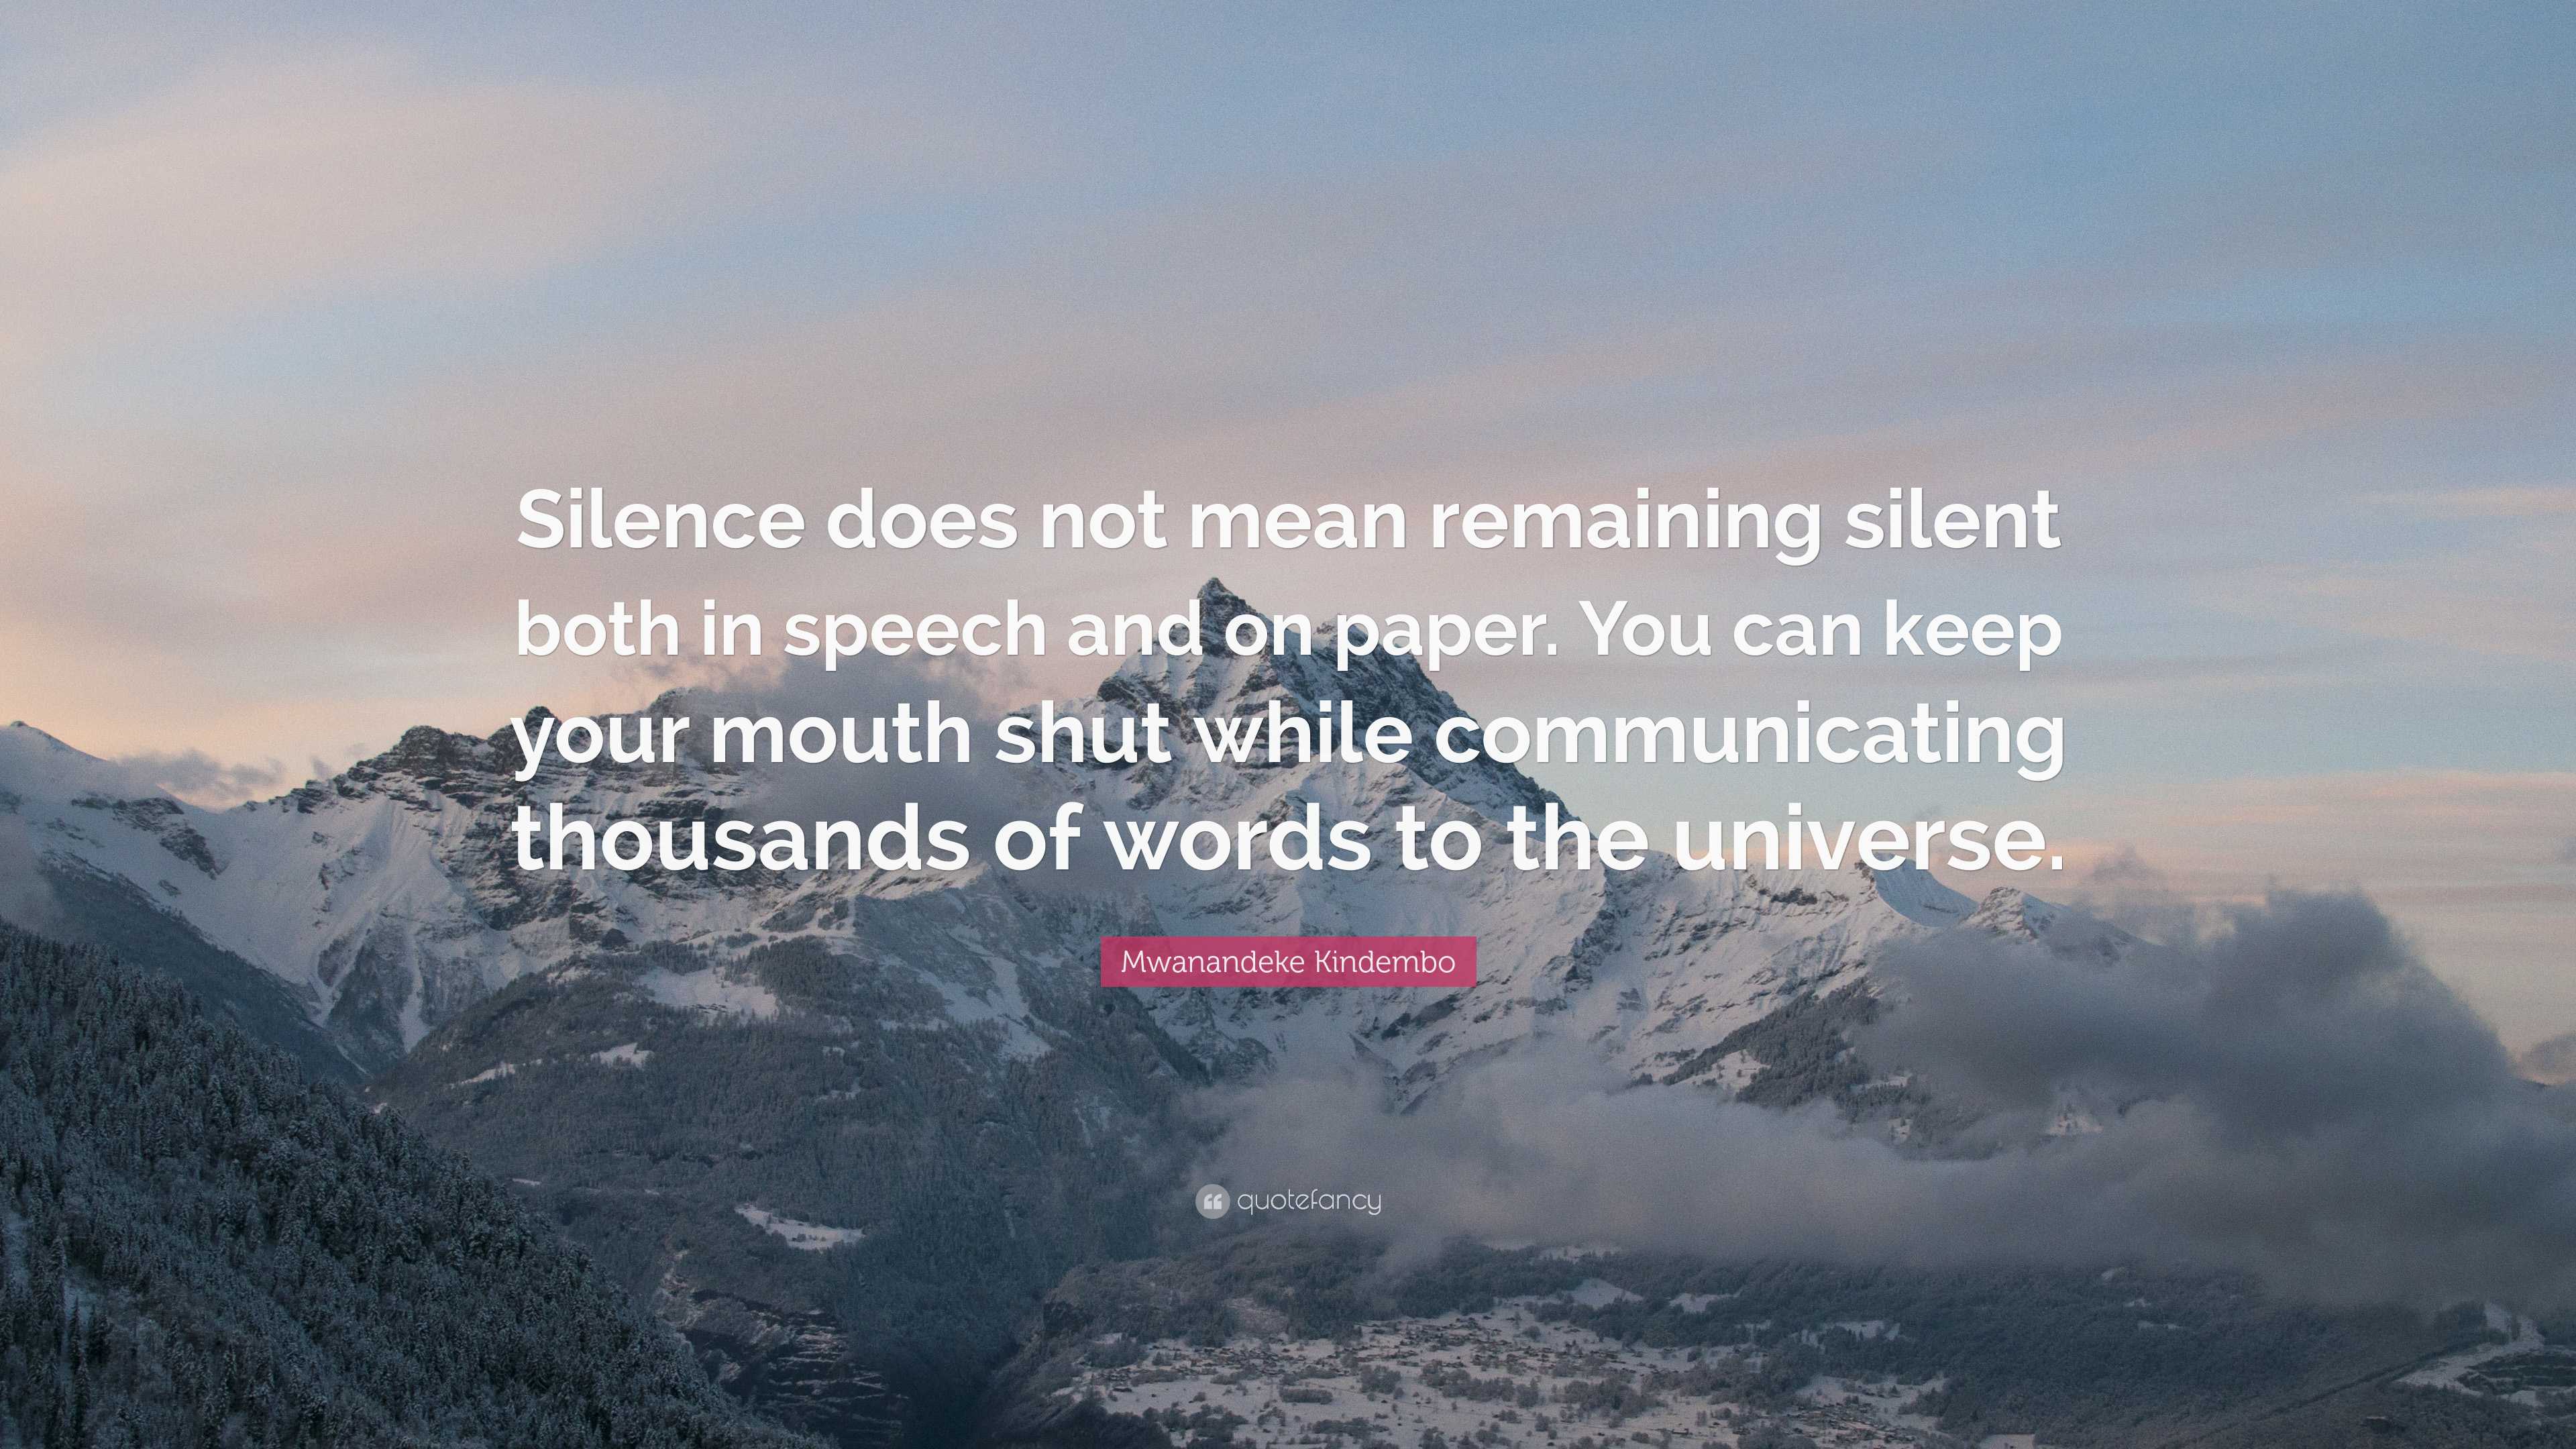 Be Silent, So you can Listen and - Nine Knowledge #Oonoo